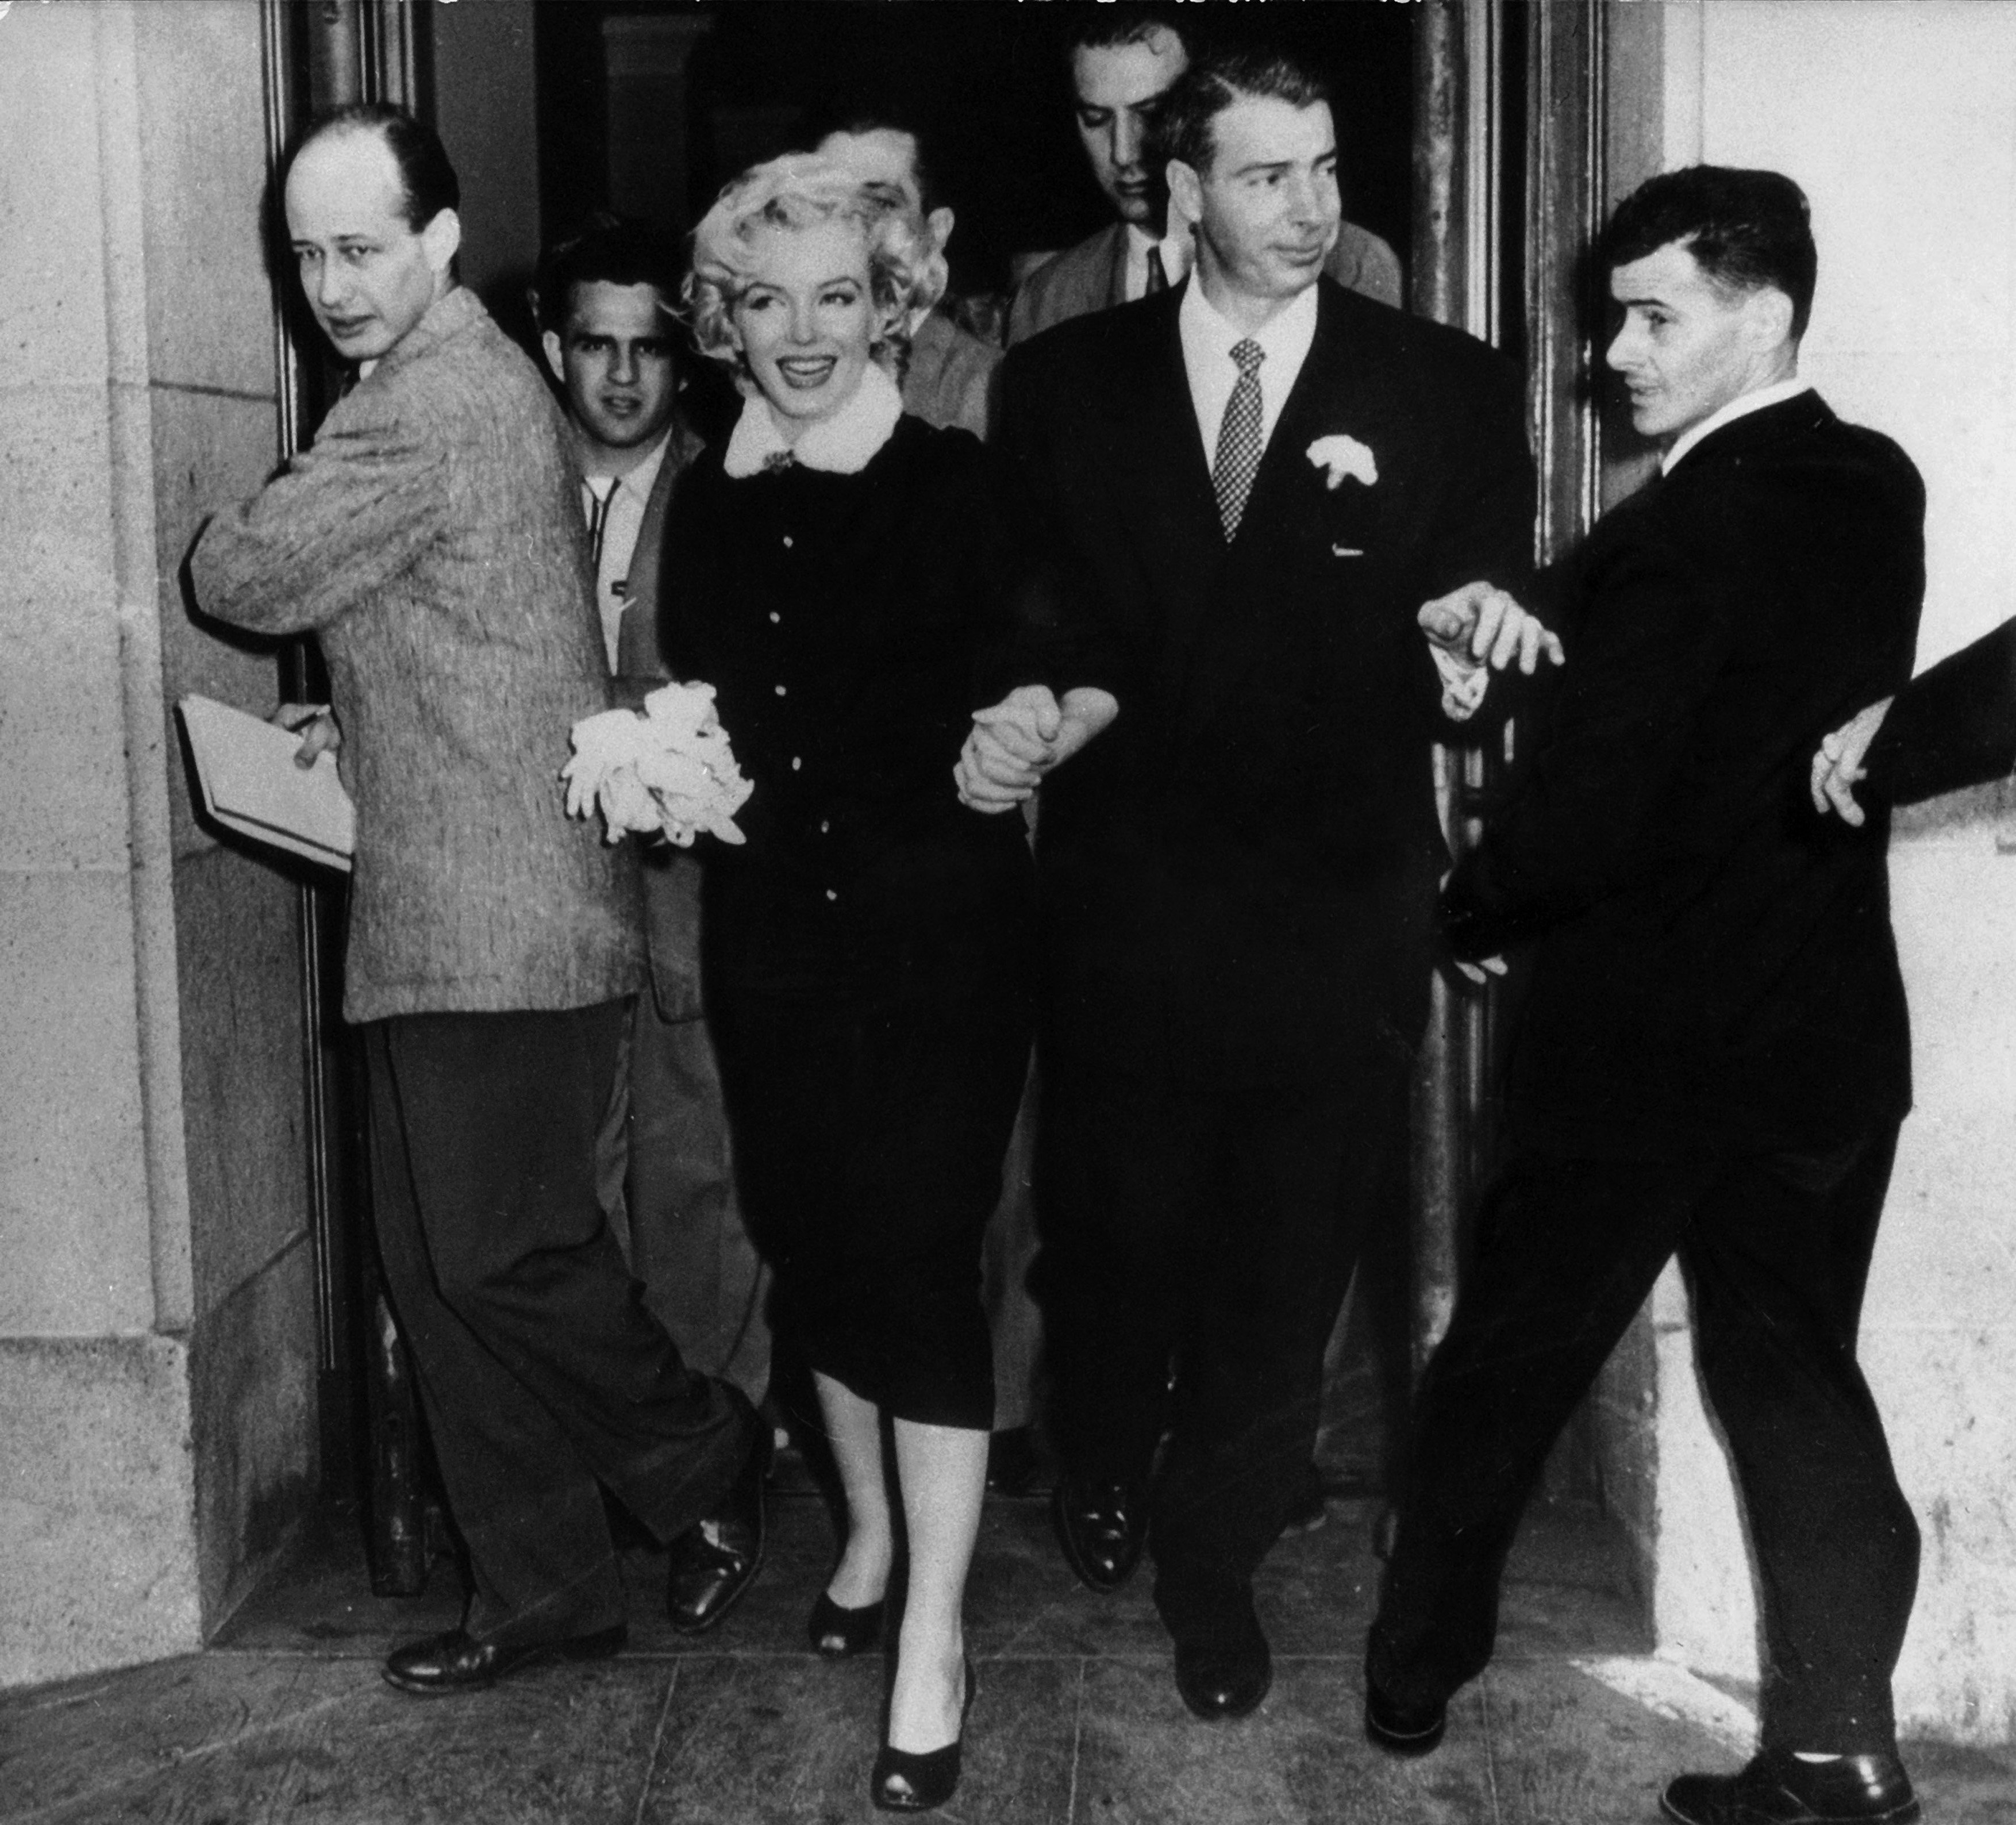 Marilyn Monroe leaves courthouse With Joe Dimaggio